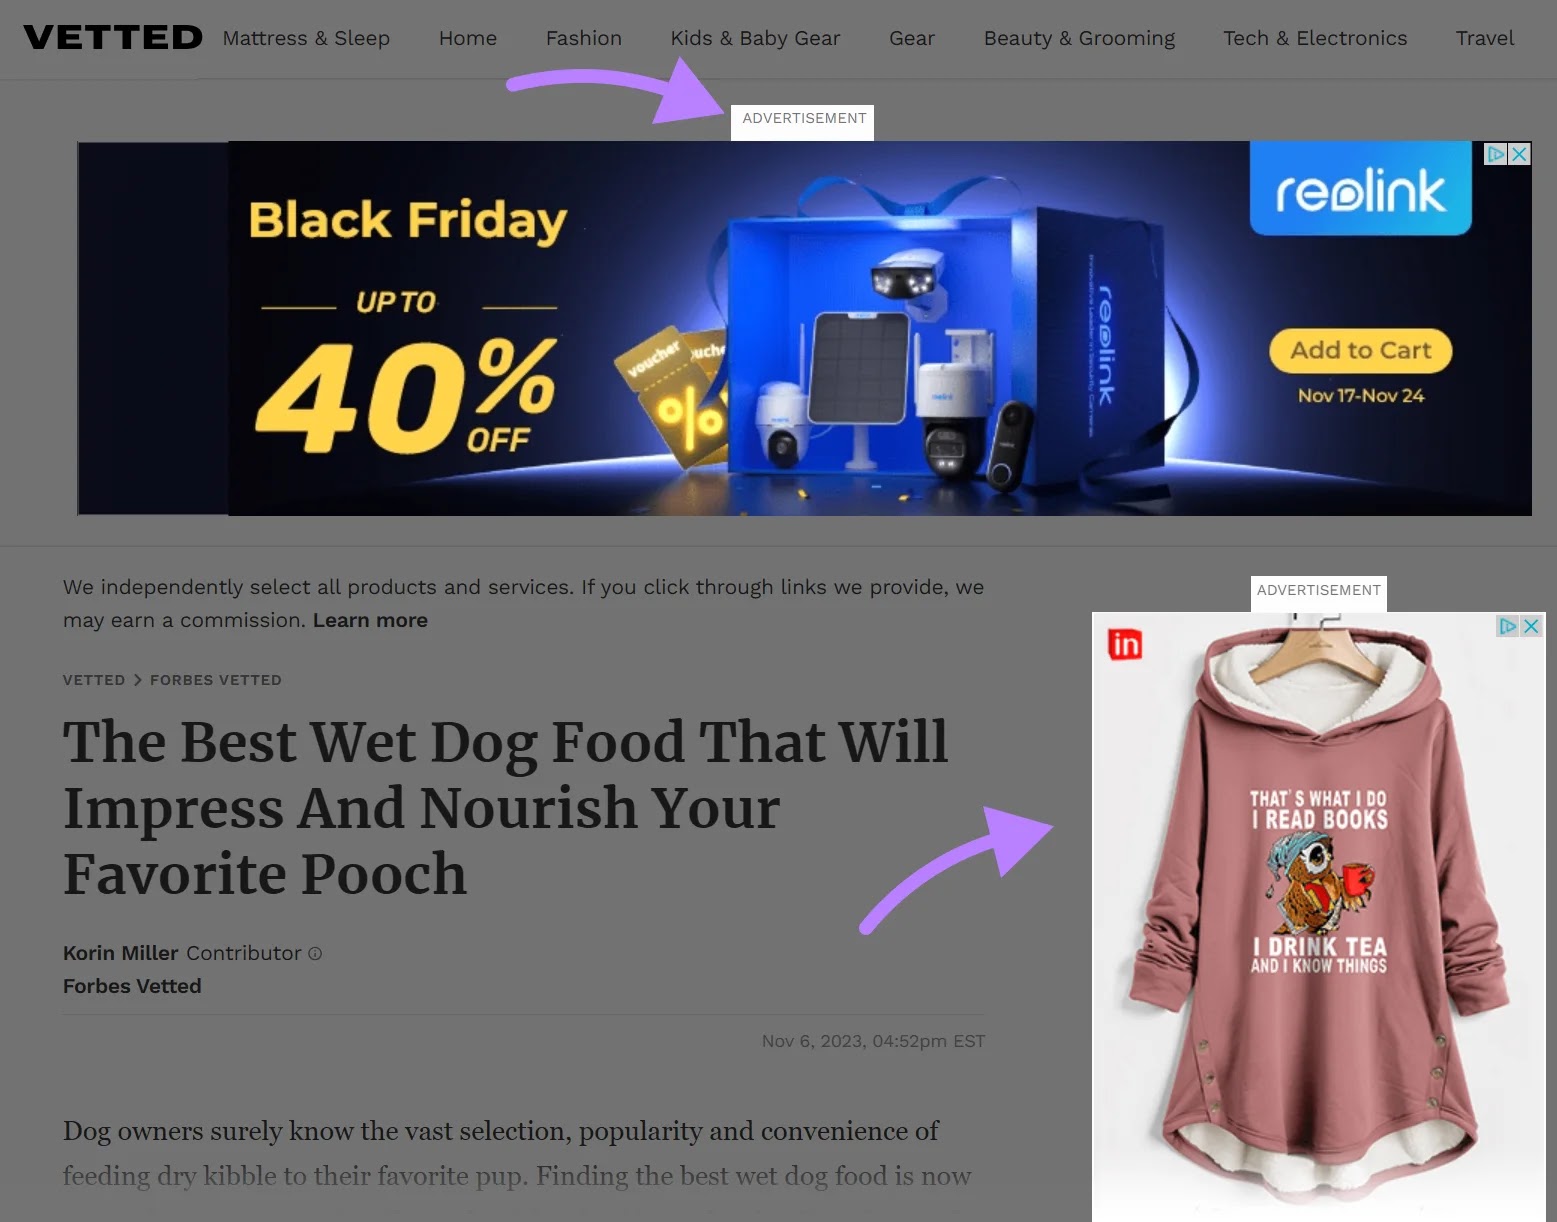 Display ads on a media site